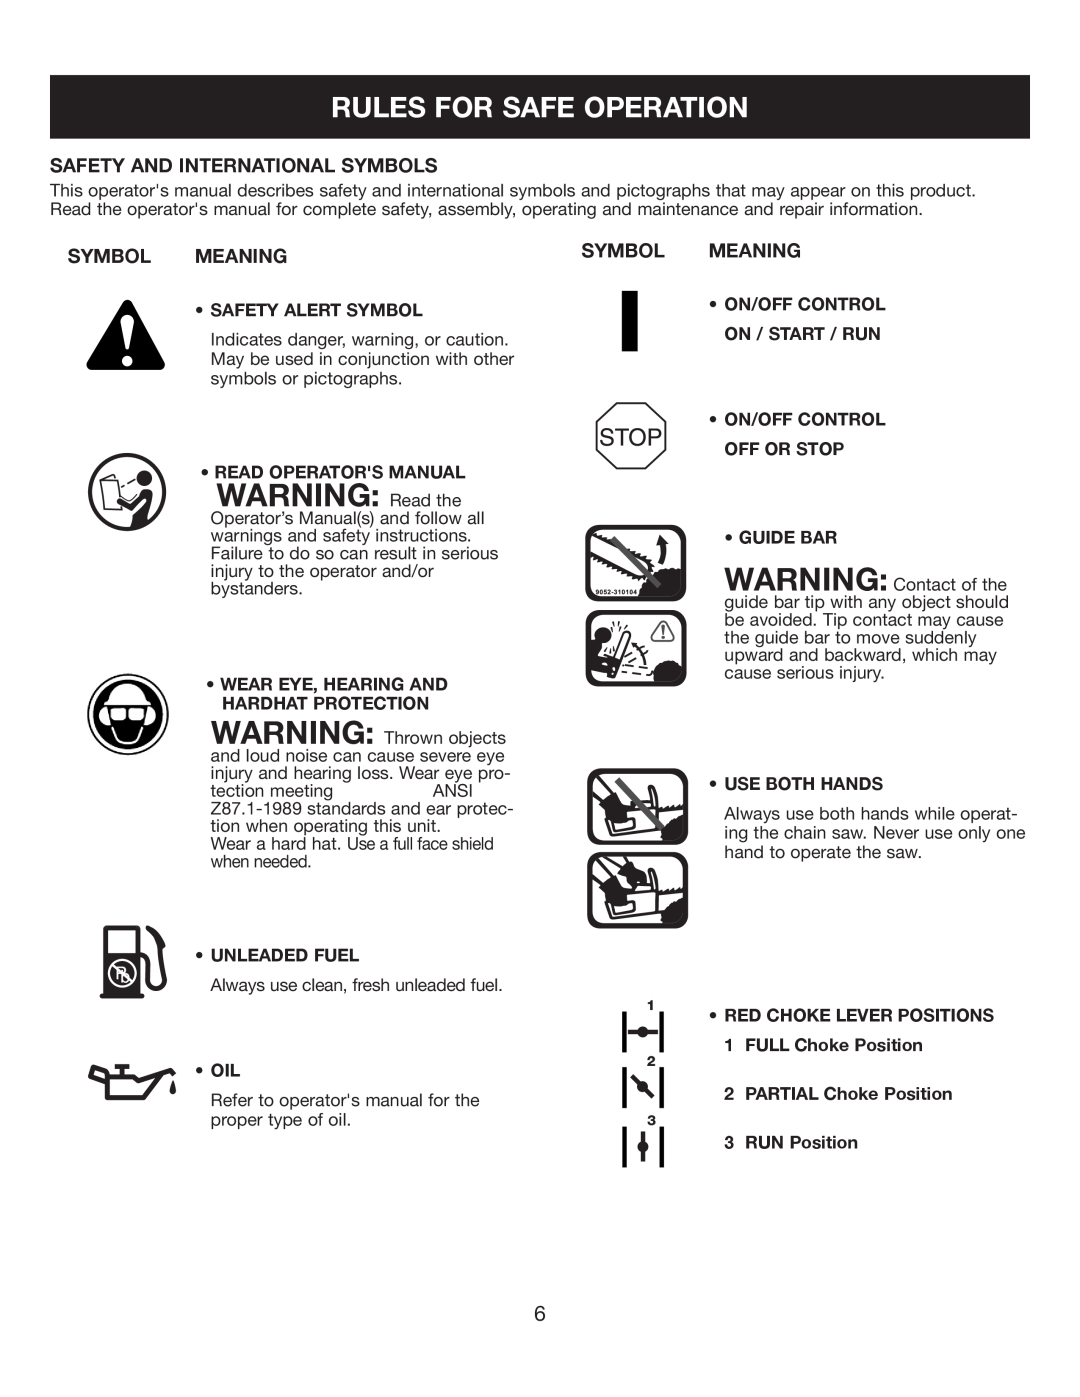 Sears 316.35084 manual WARNING Read the, Rules For Safe Operation, Safety And International Symbols, Symbol Meaning 